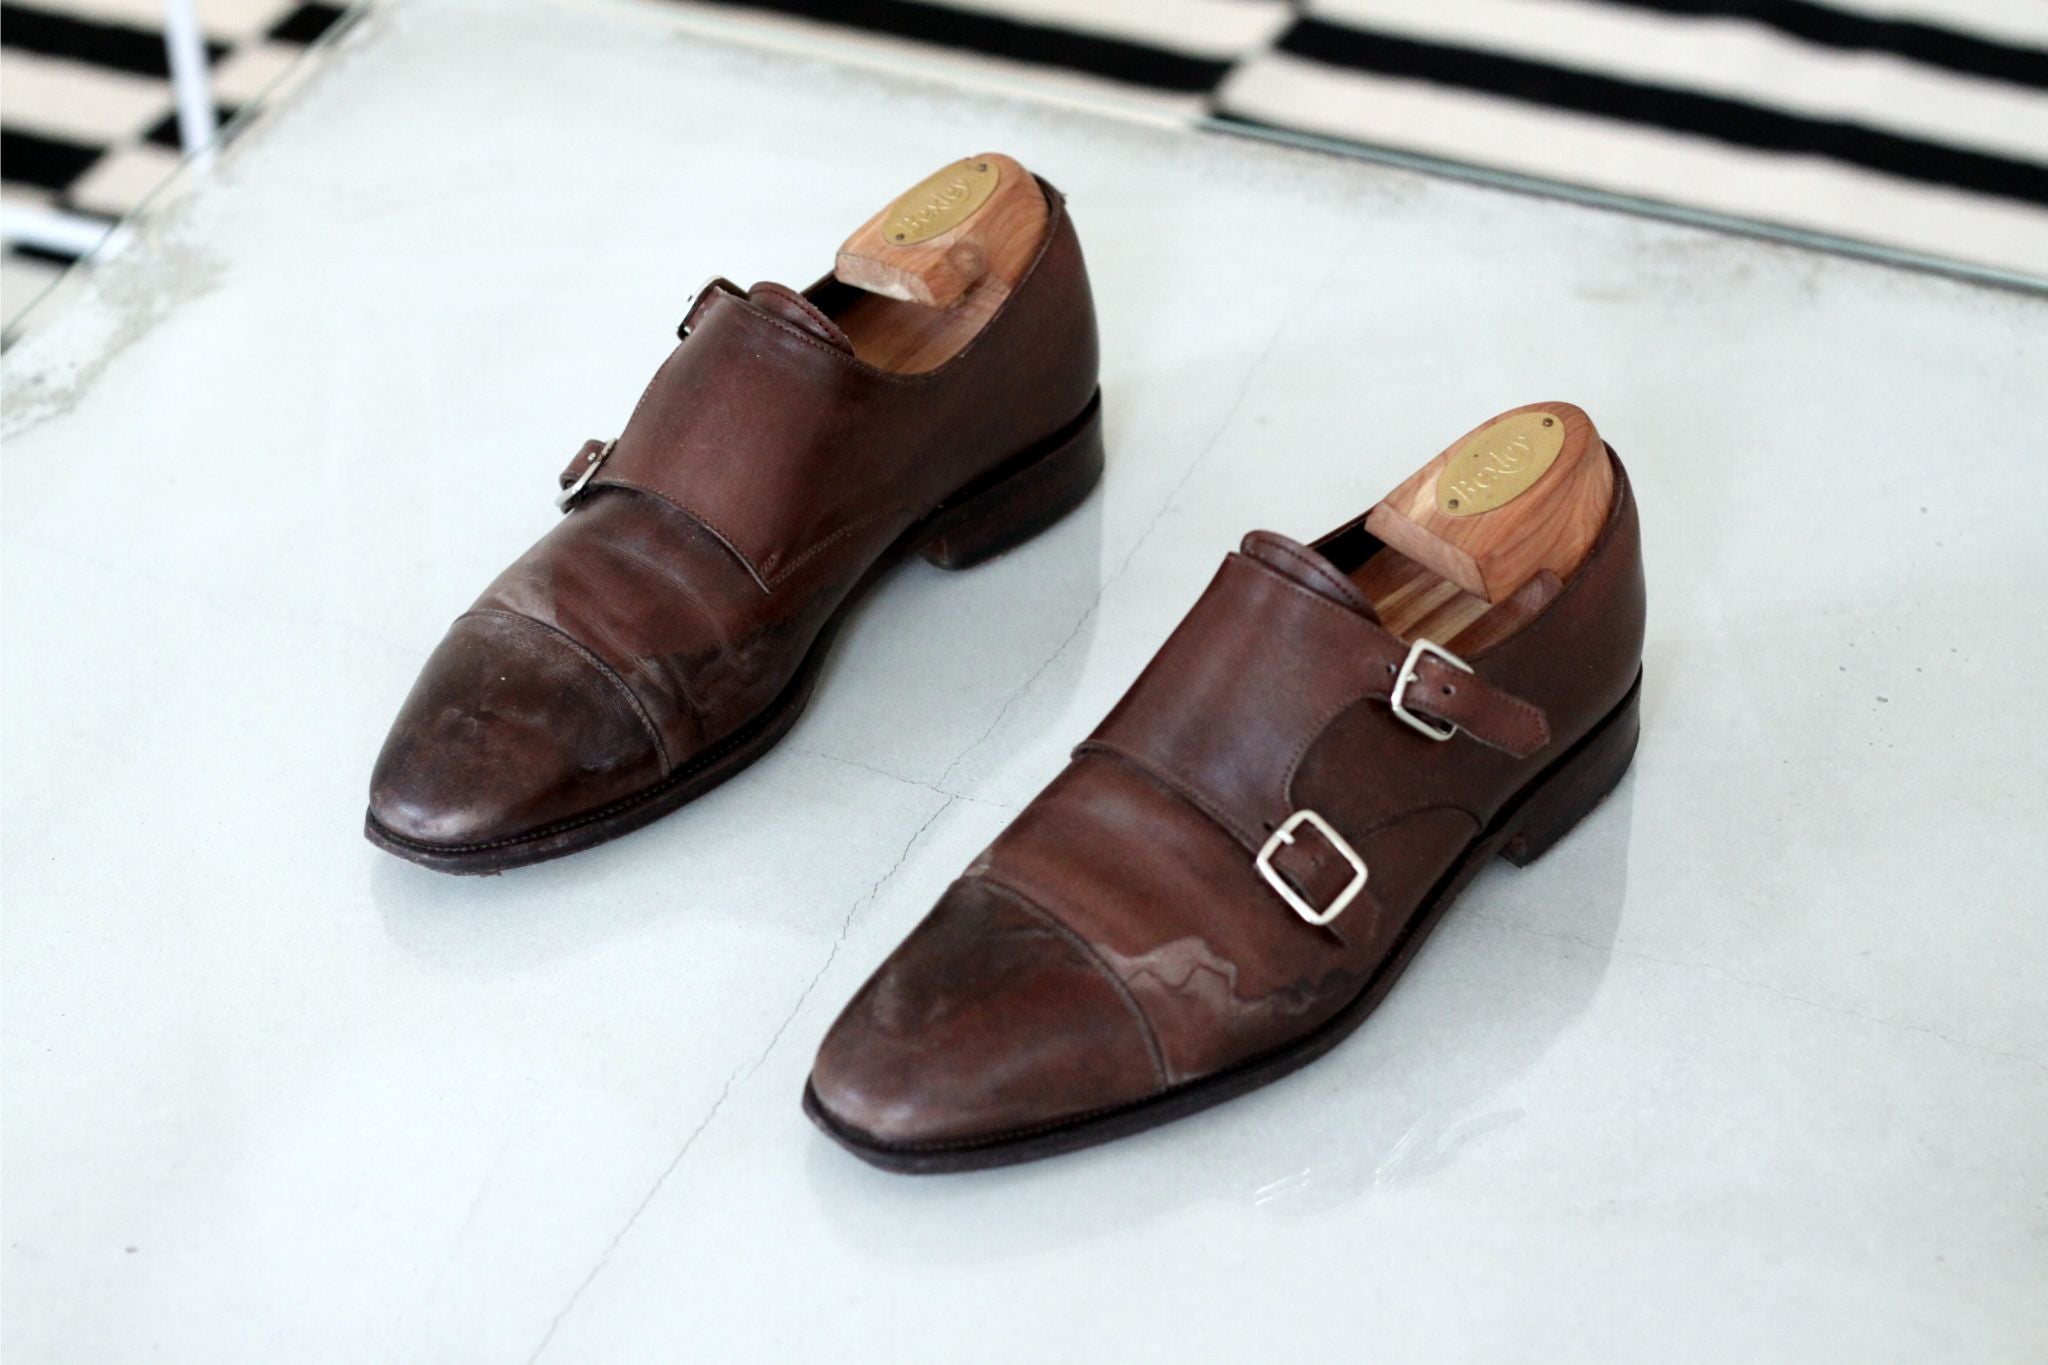 How to take care your shoes - remember to moisturize your leathers shoes